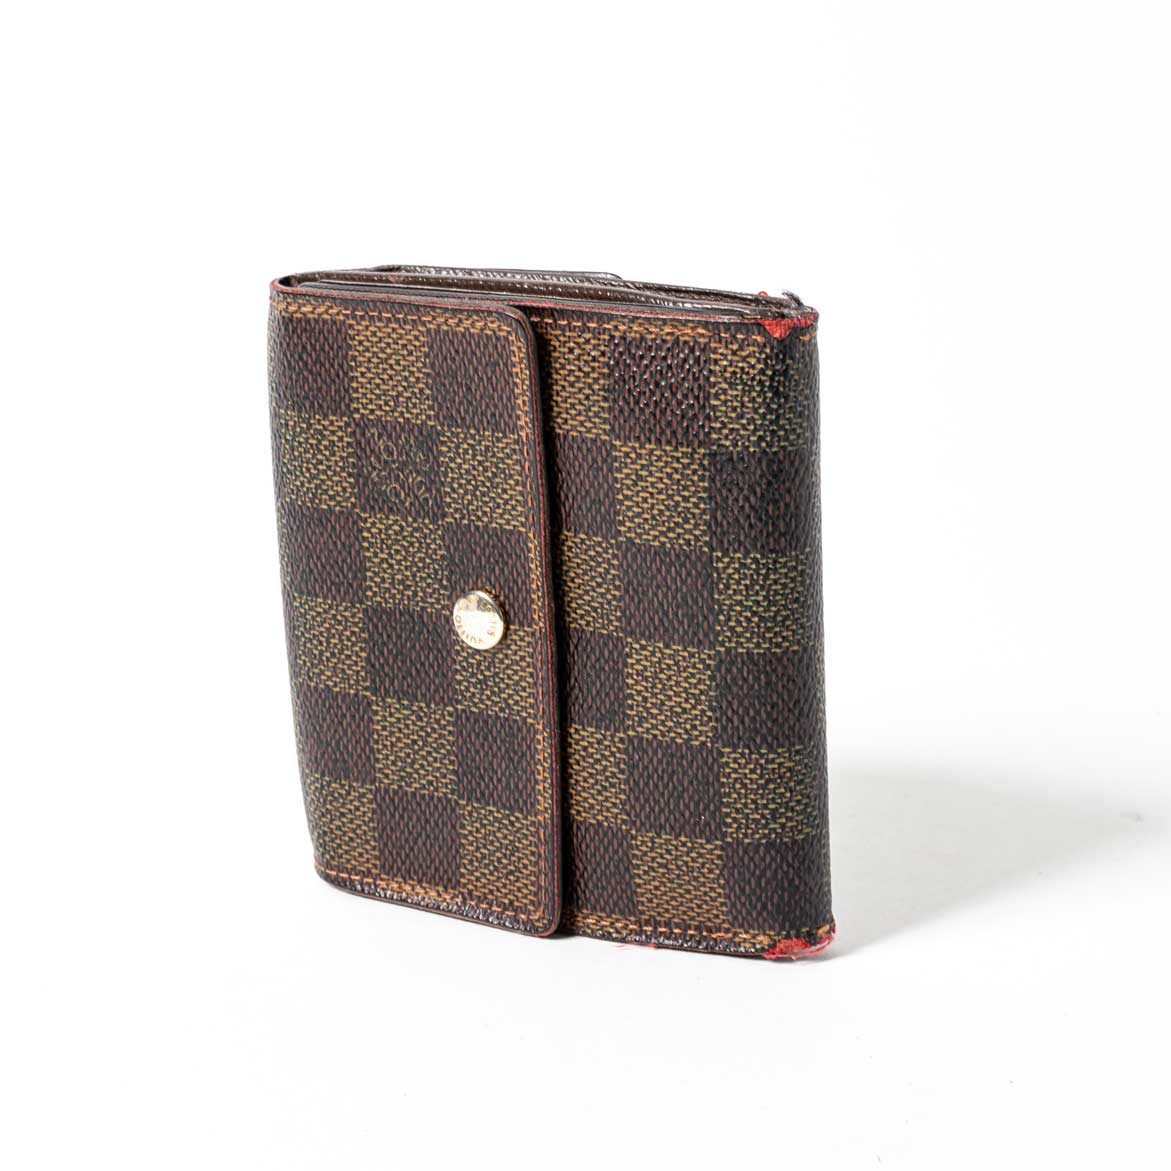 Vintage Louis Vuitton Cardholder with SY engraving - Shop Quirk